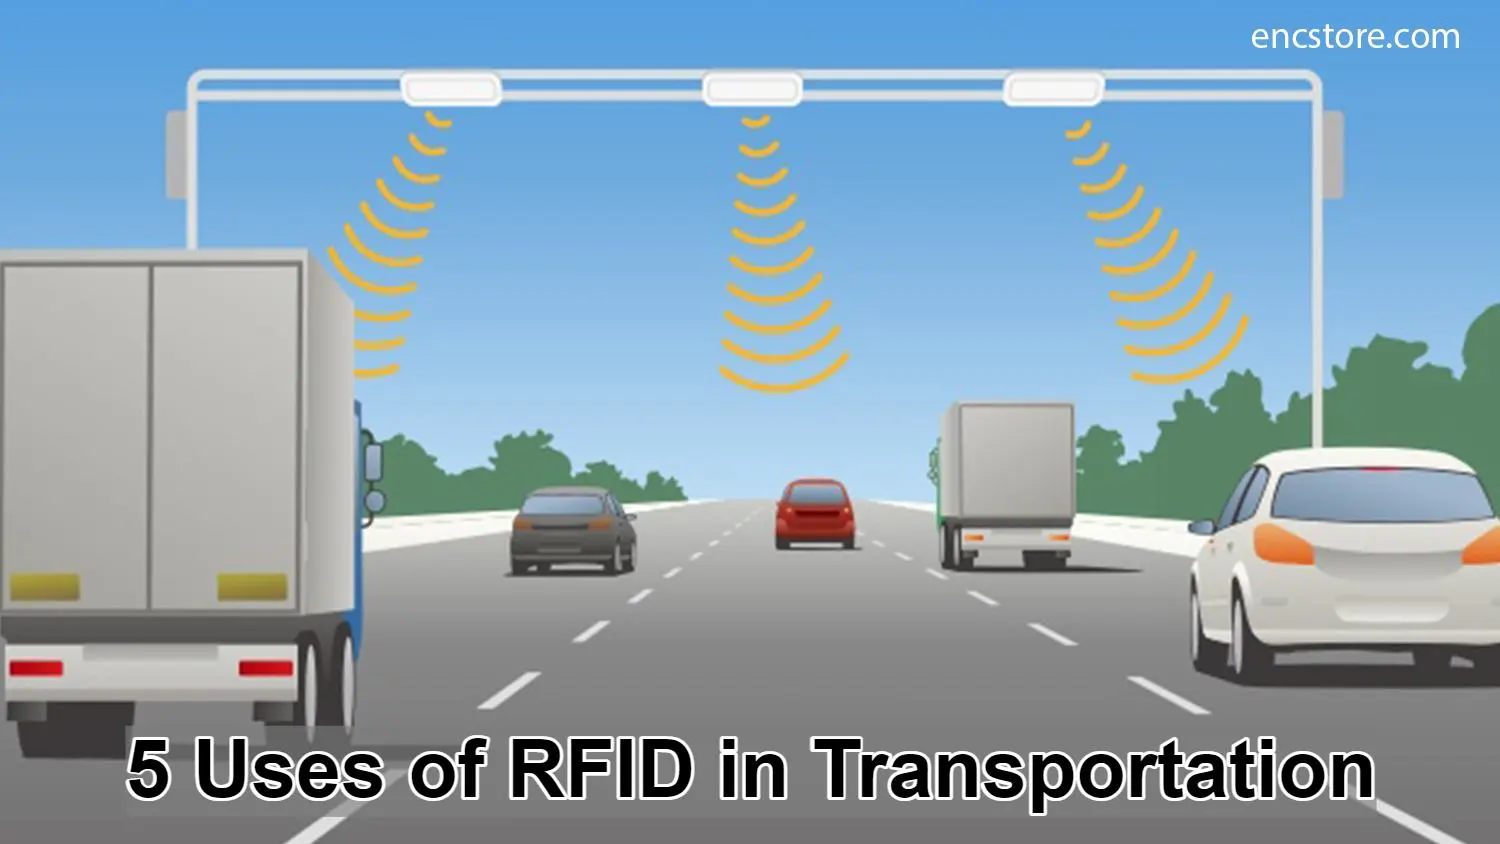 Uses of RFID in Transportation